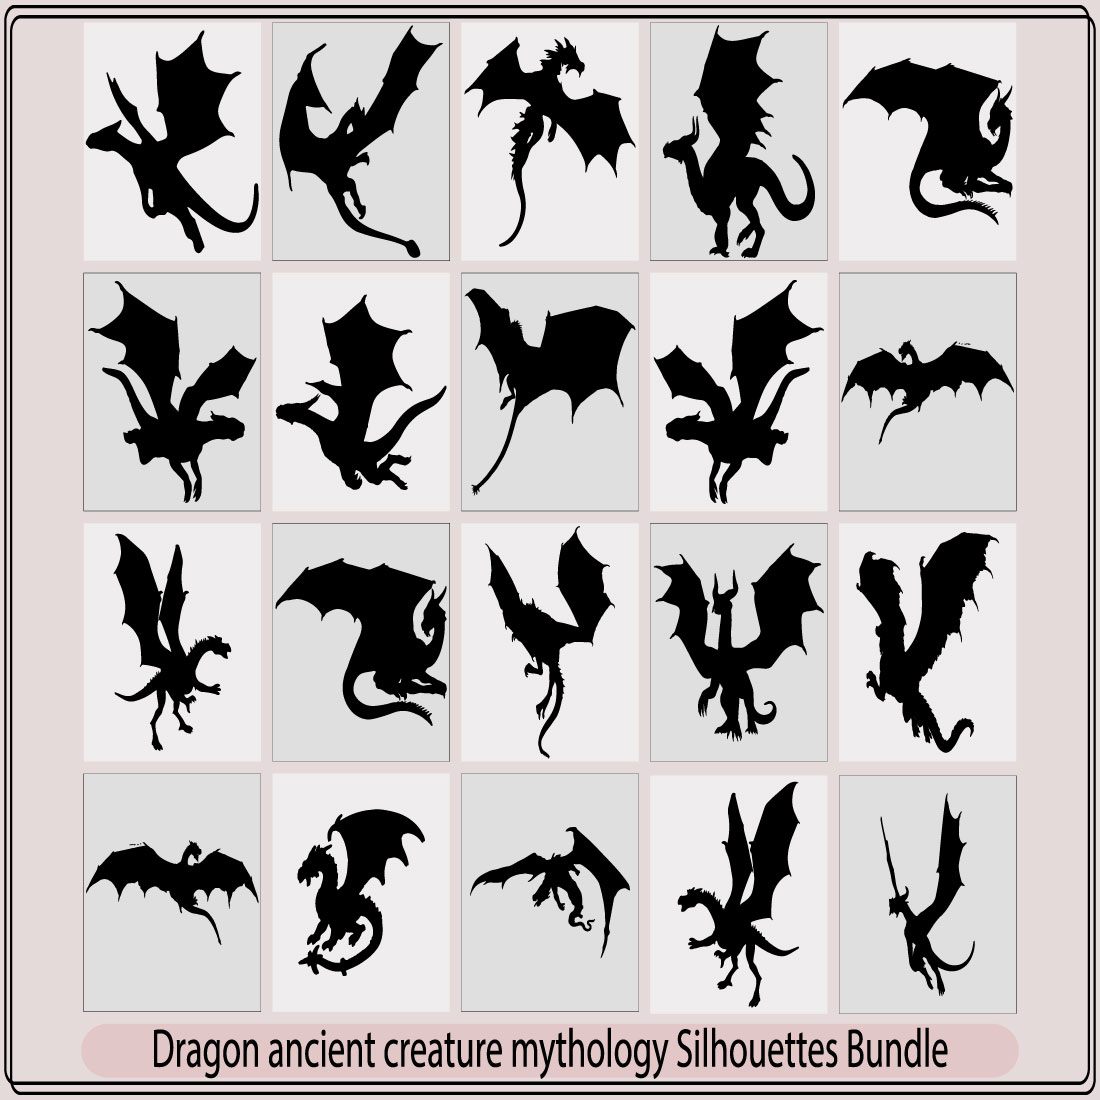 Dragon ancient creature mythology silhouette,dragon silhouettes on white background,Dragon Flying, Mythical Beast Illustration preview image.